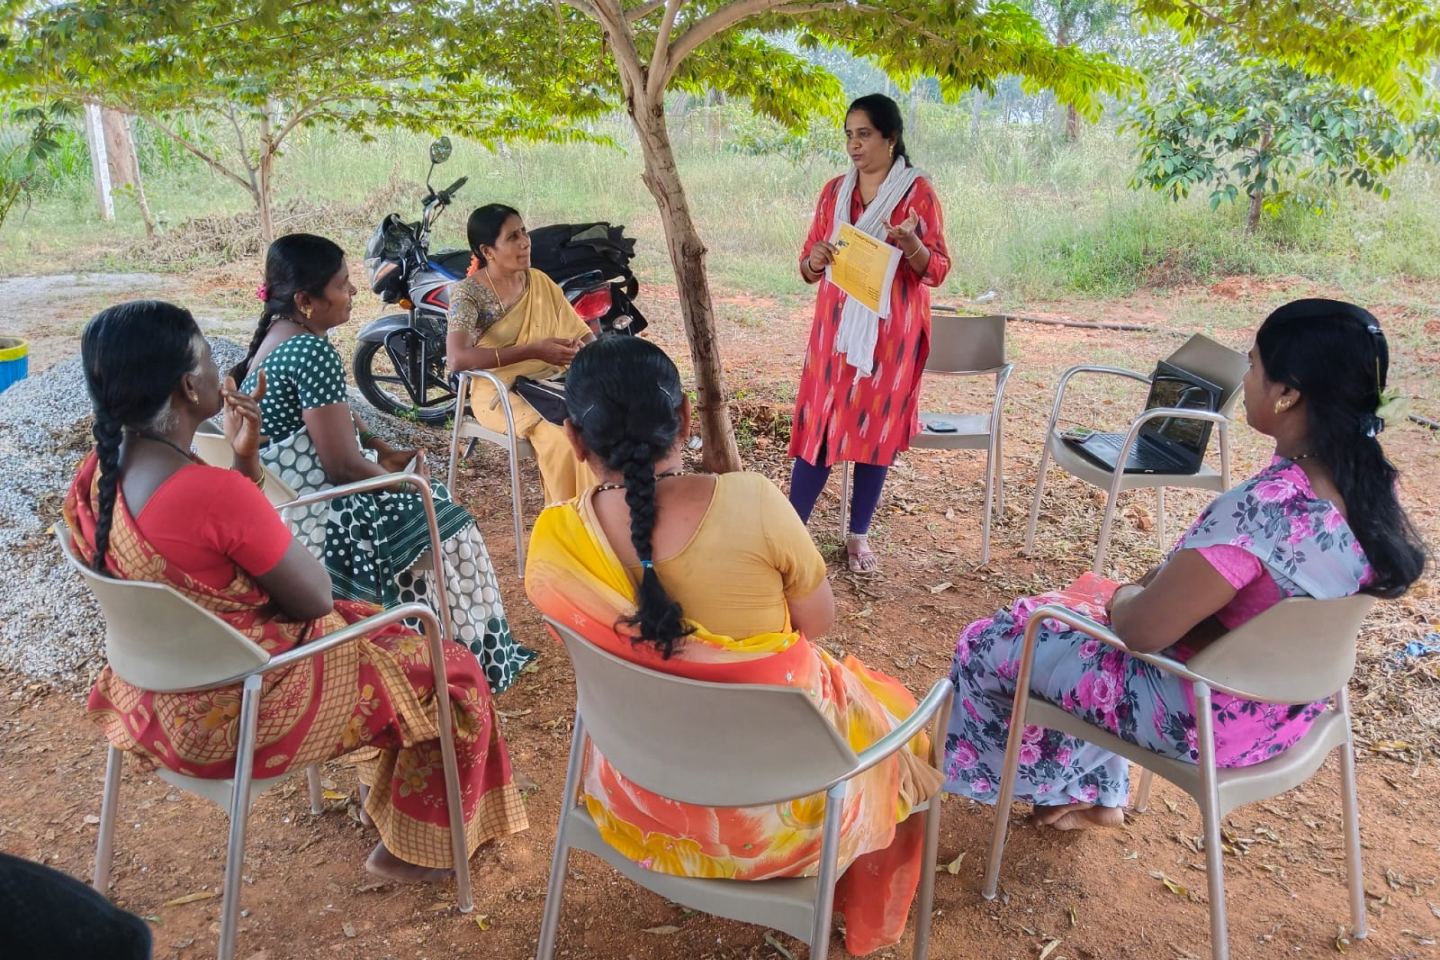 Group of women in India or Nepal learning new business skills with Pollinate Group